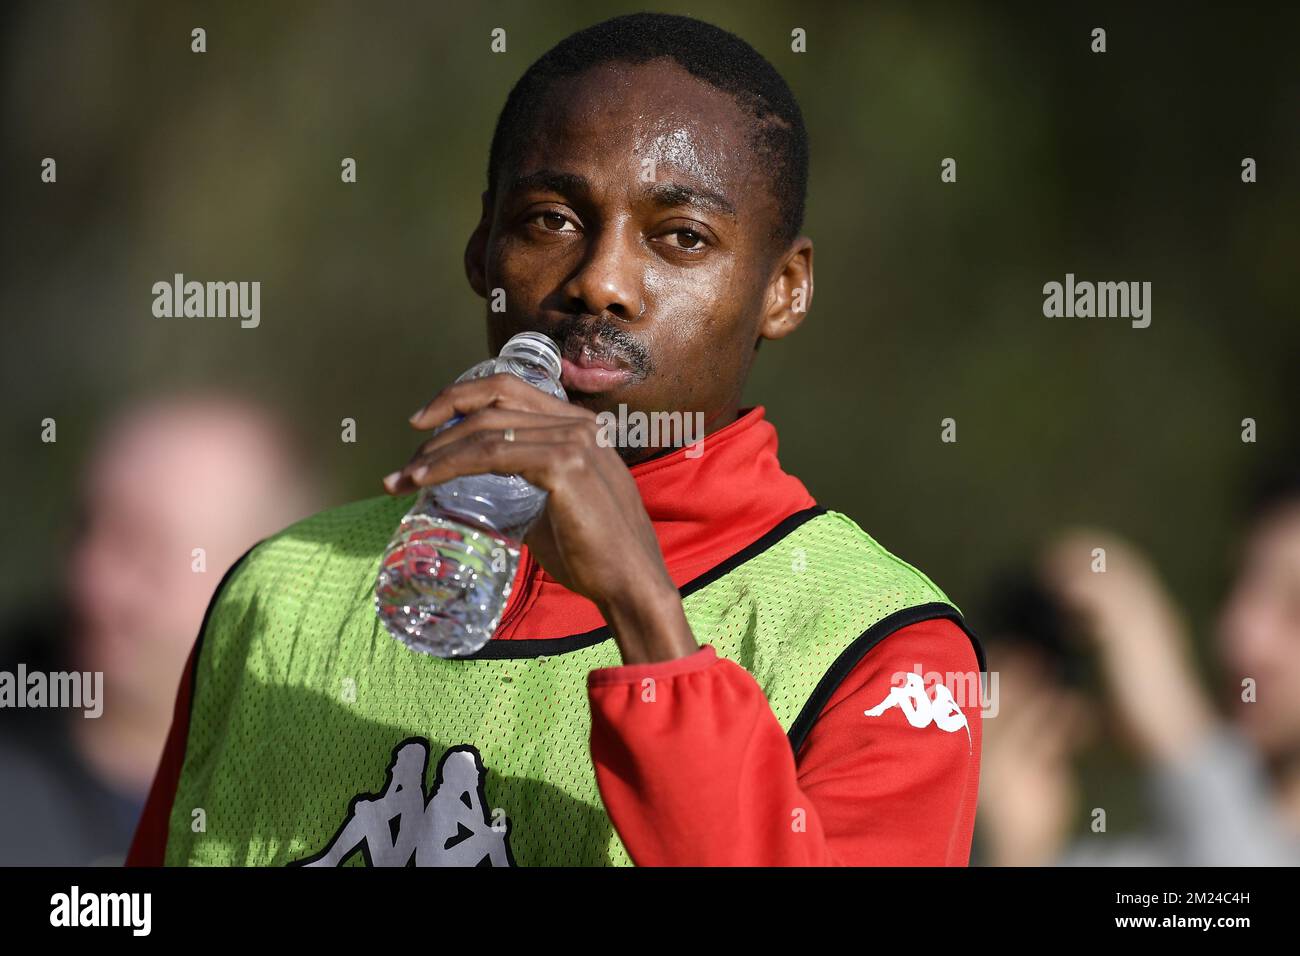 Standard's Eyong Enoh pictured during the fourth day of the winter training camp of Belgian first division soccer team Standard de Liege, in Marbella, Spain, Wednesday 11 January 2017. BELGA PHOTO YORICK JANSENS Stock Photo